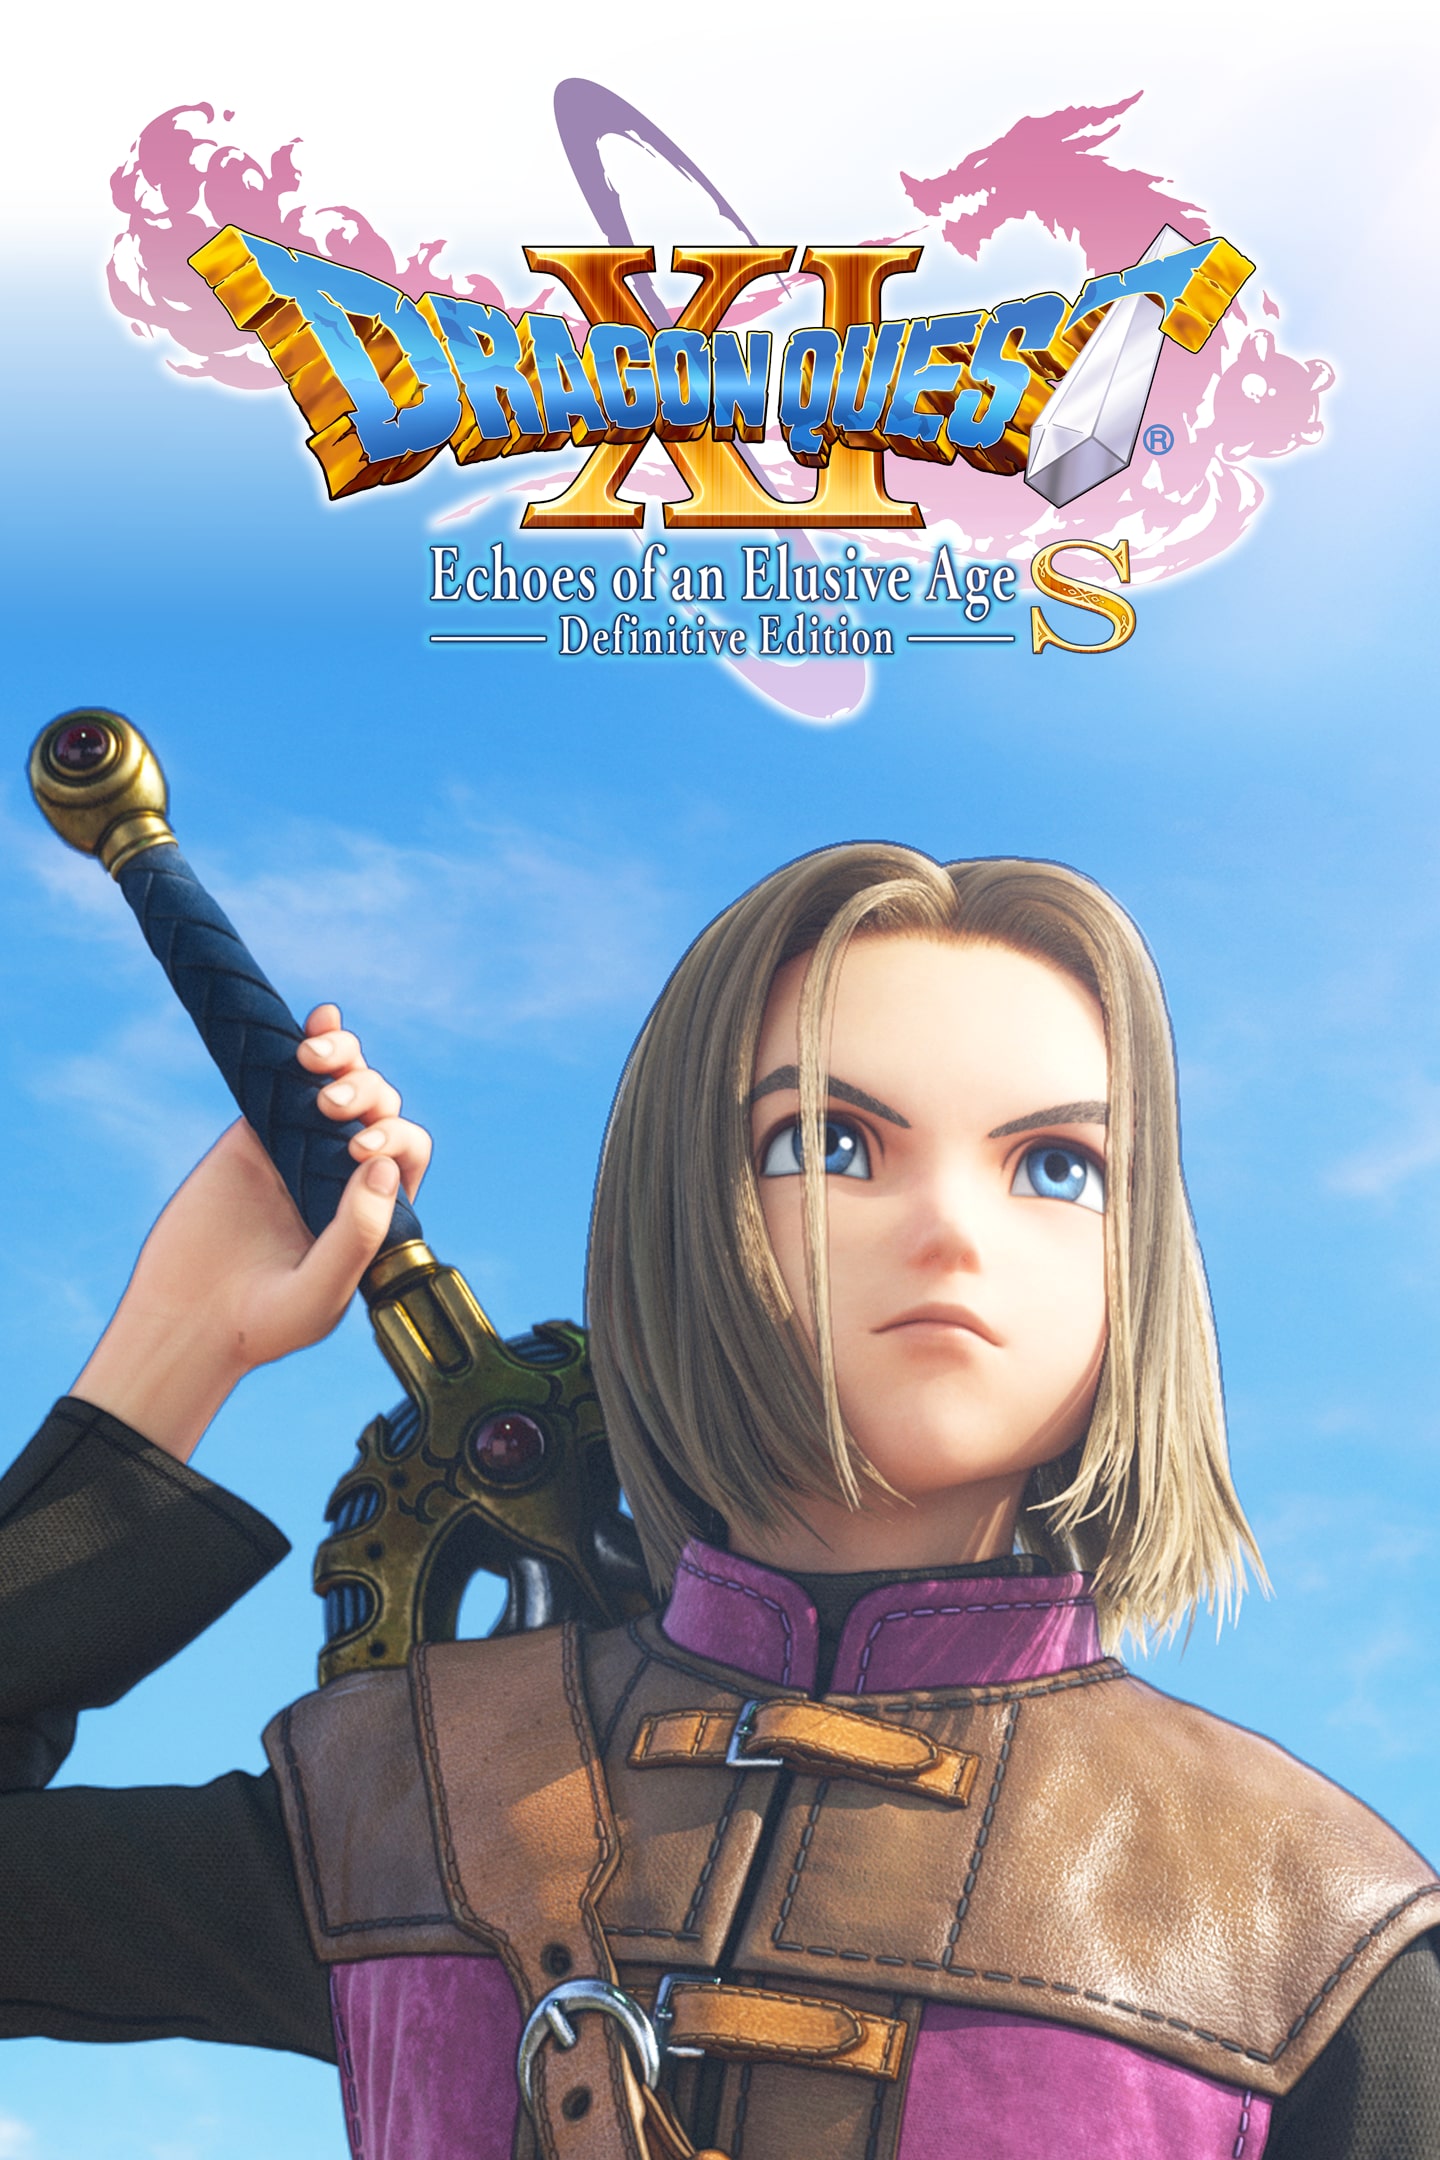 dragon-quest-xi-s-echoes-of-an-elusive-age-definitive-edition-on-steam-lupon-gov-ph